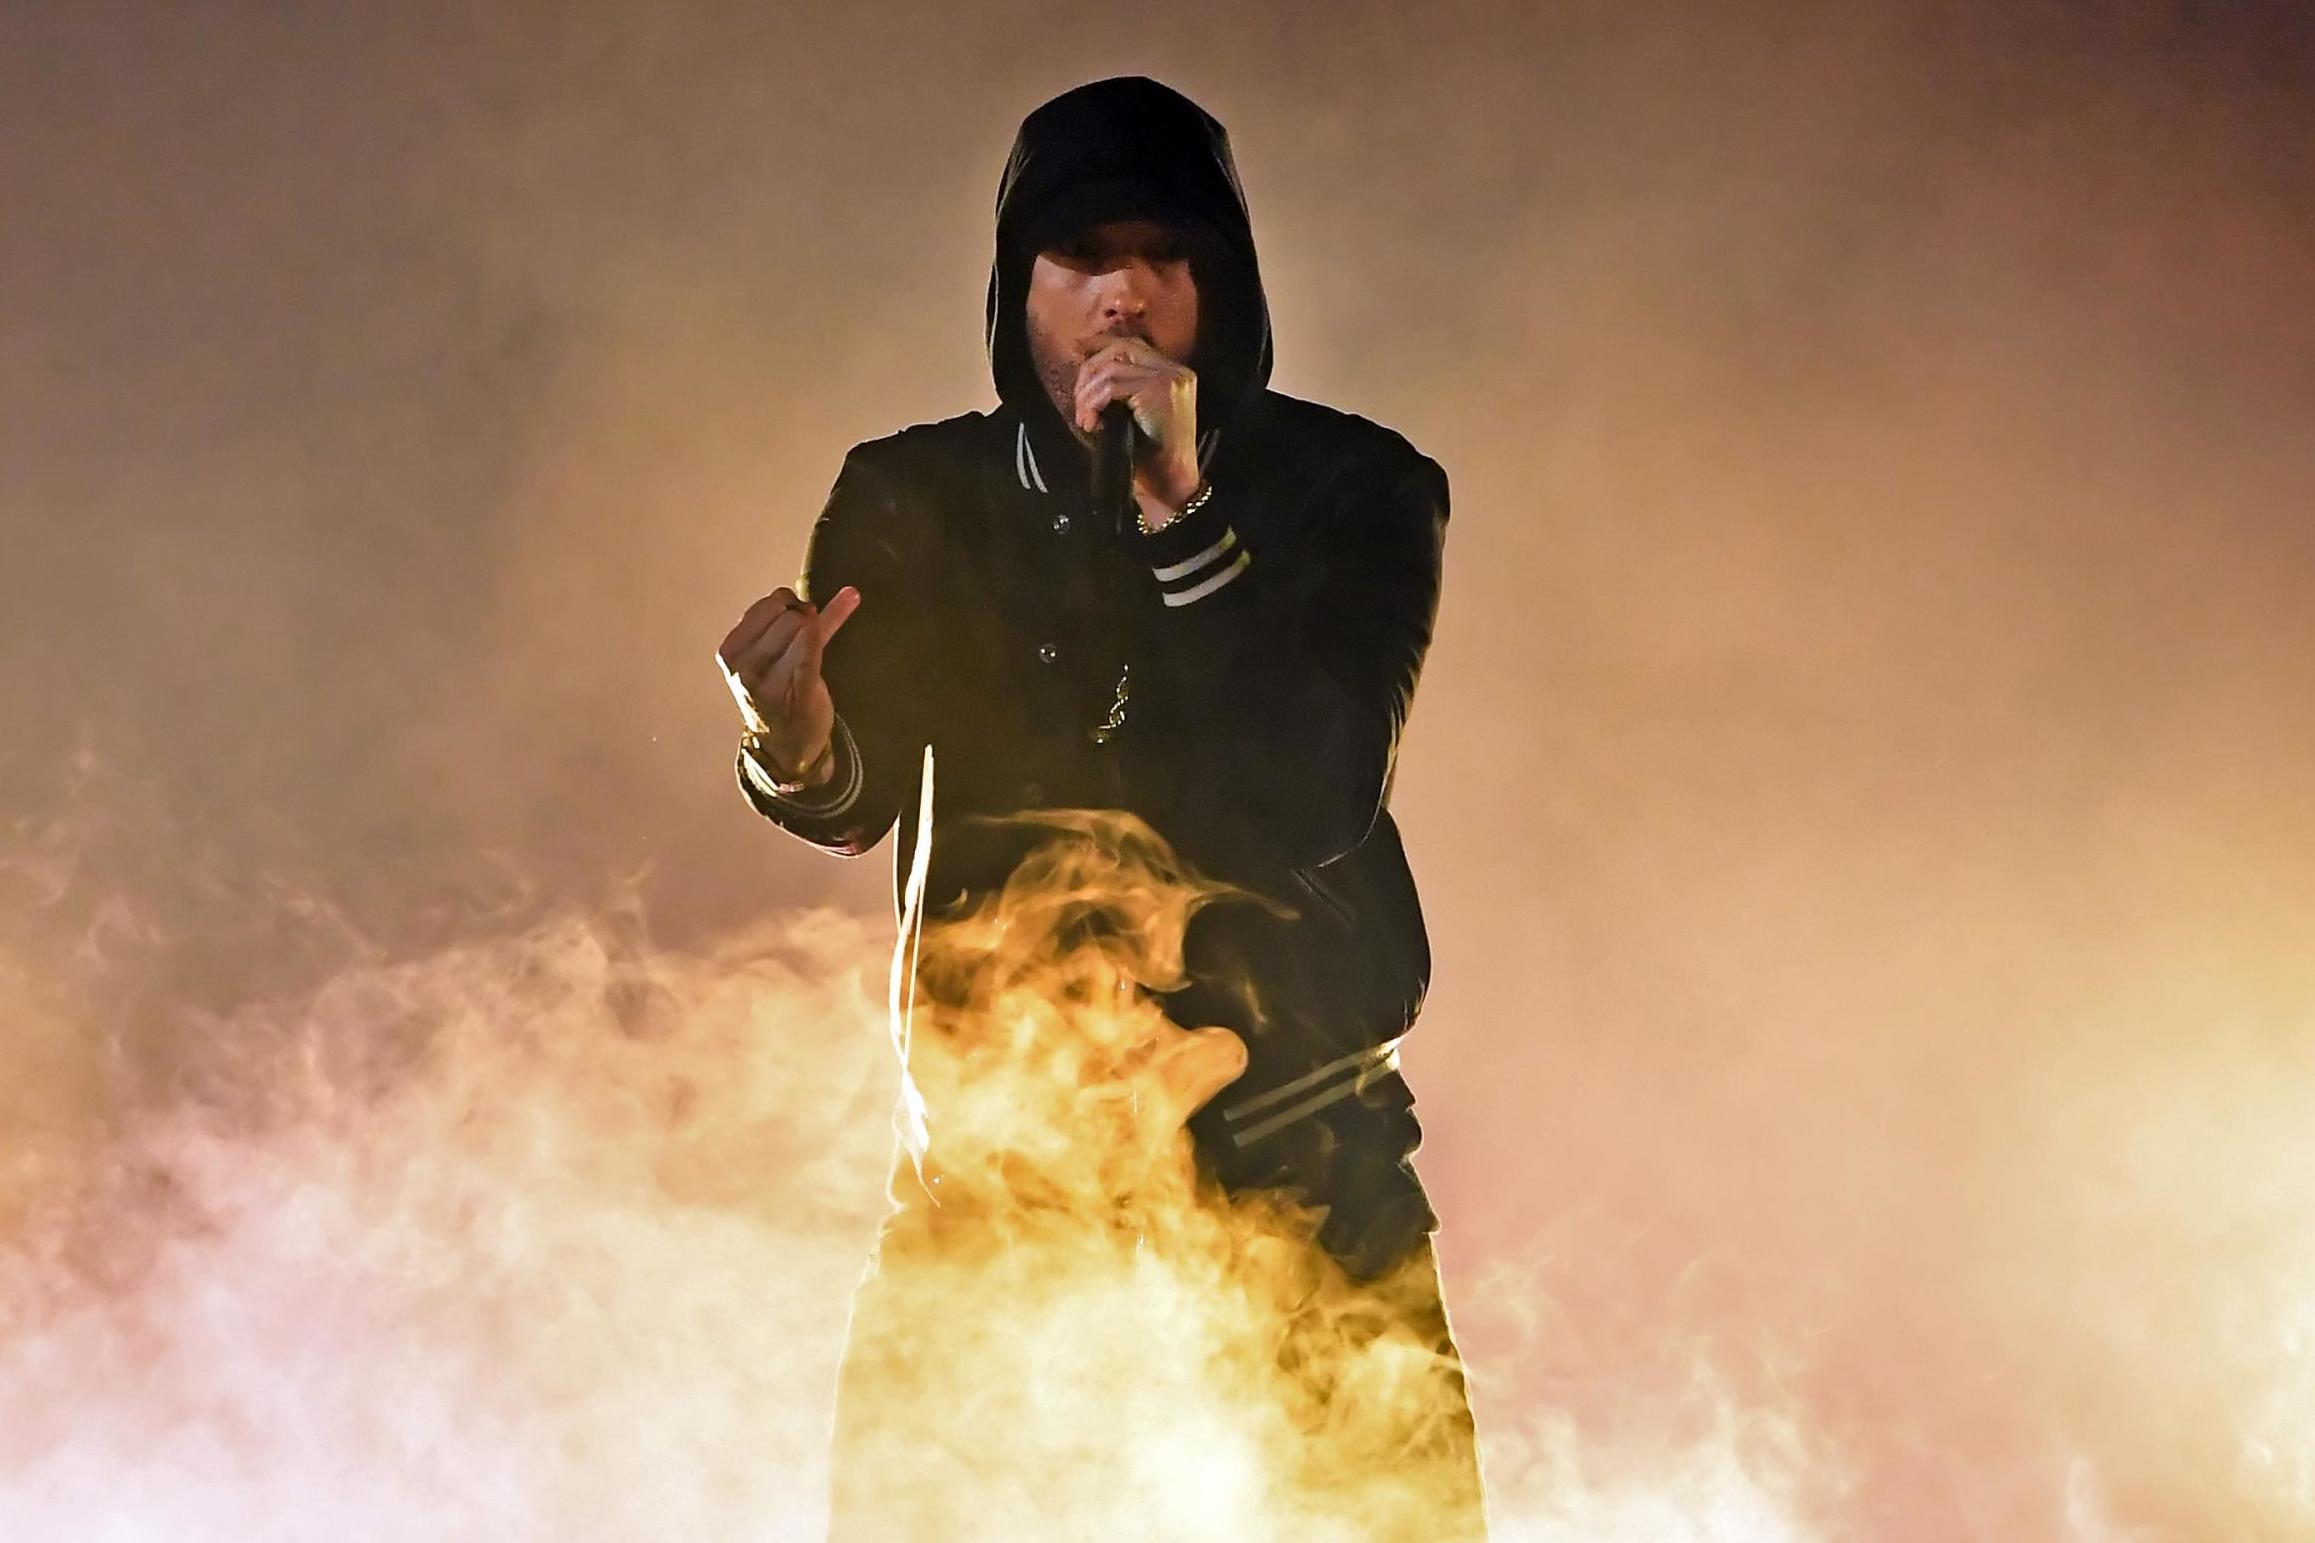 Is Eminem really satanic or are his lyrics about the devil and